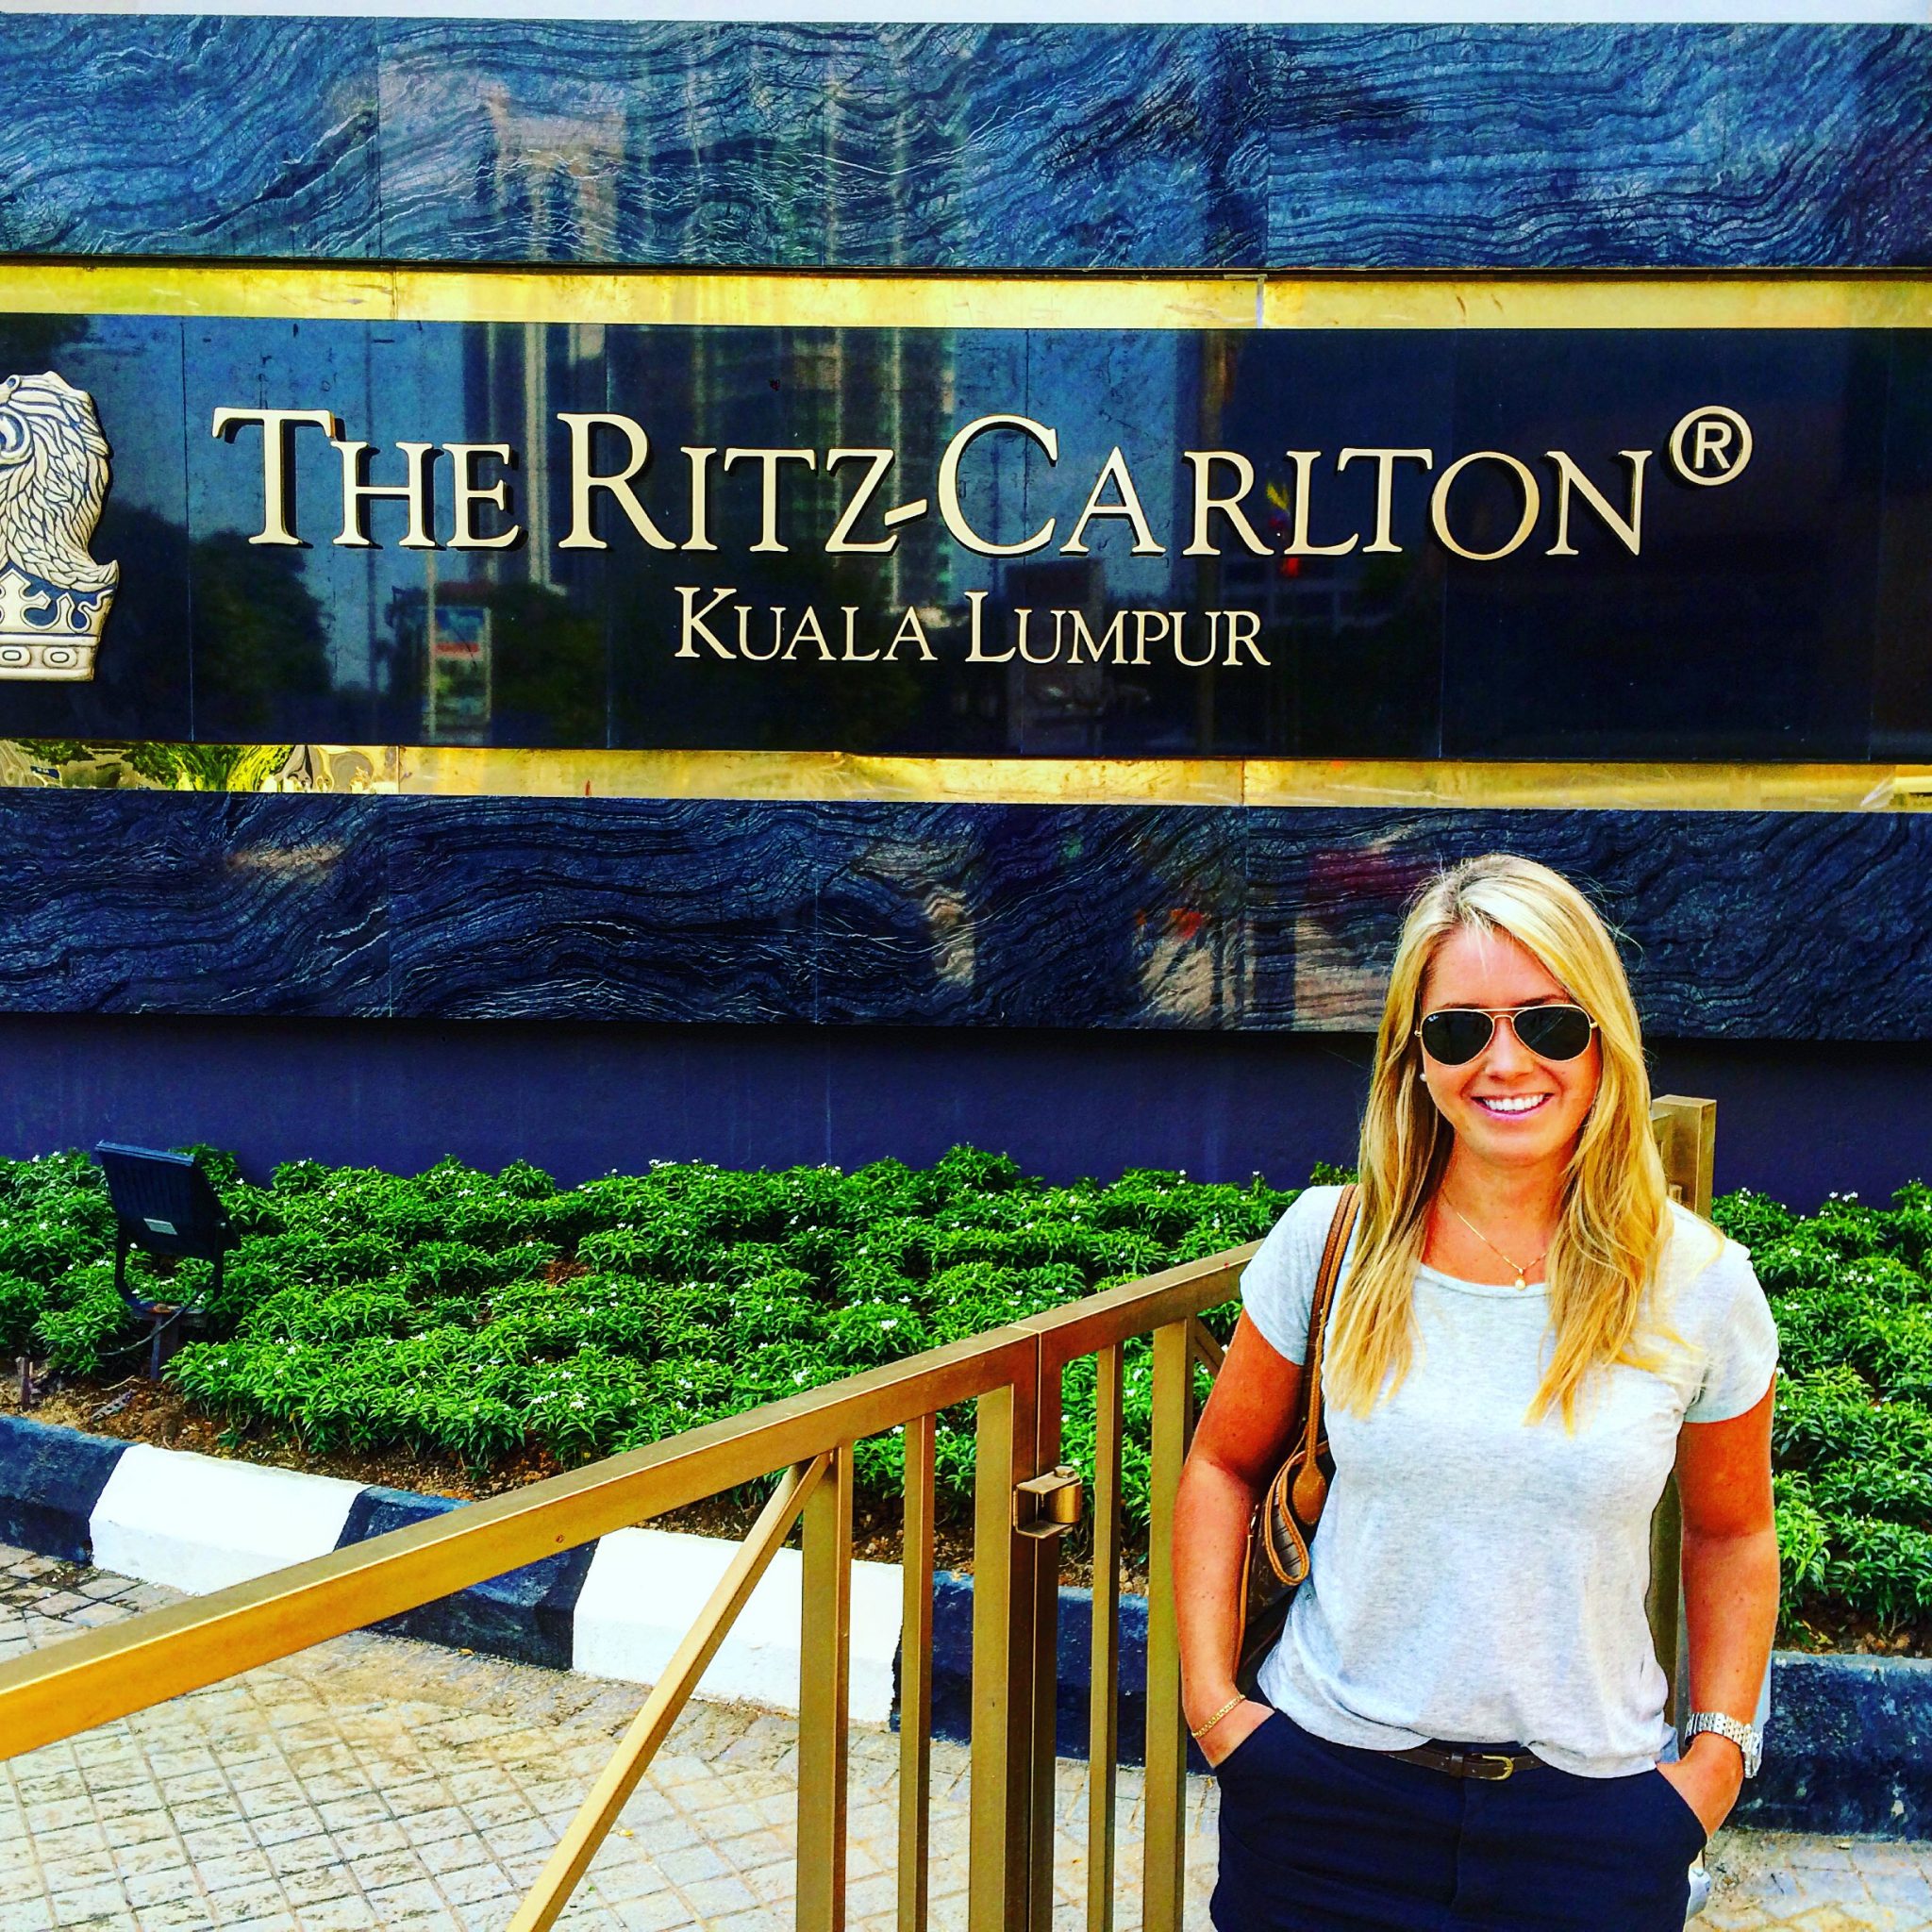 A picture of me standing outside the Ritz Carlton hotel in Kuala Lumpur